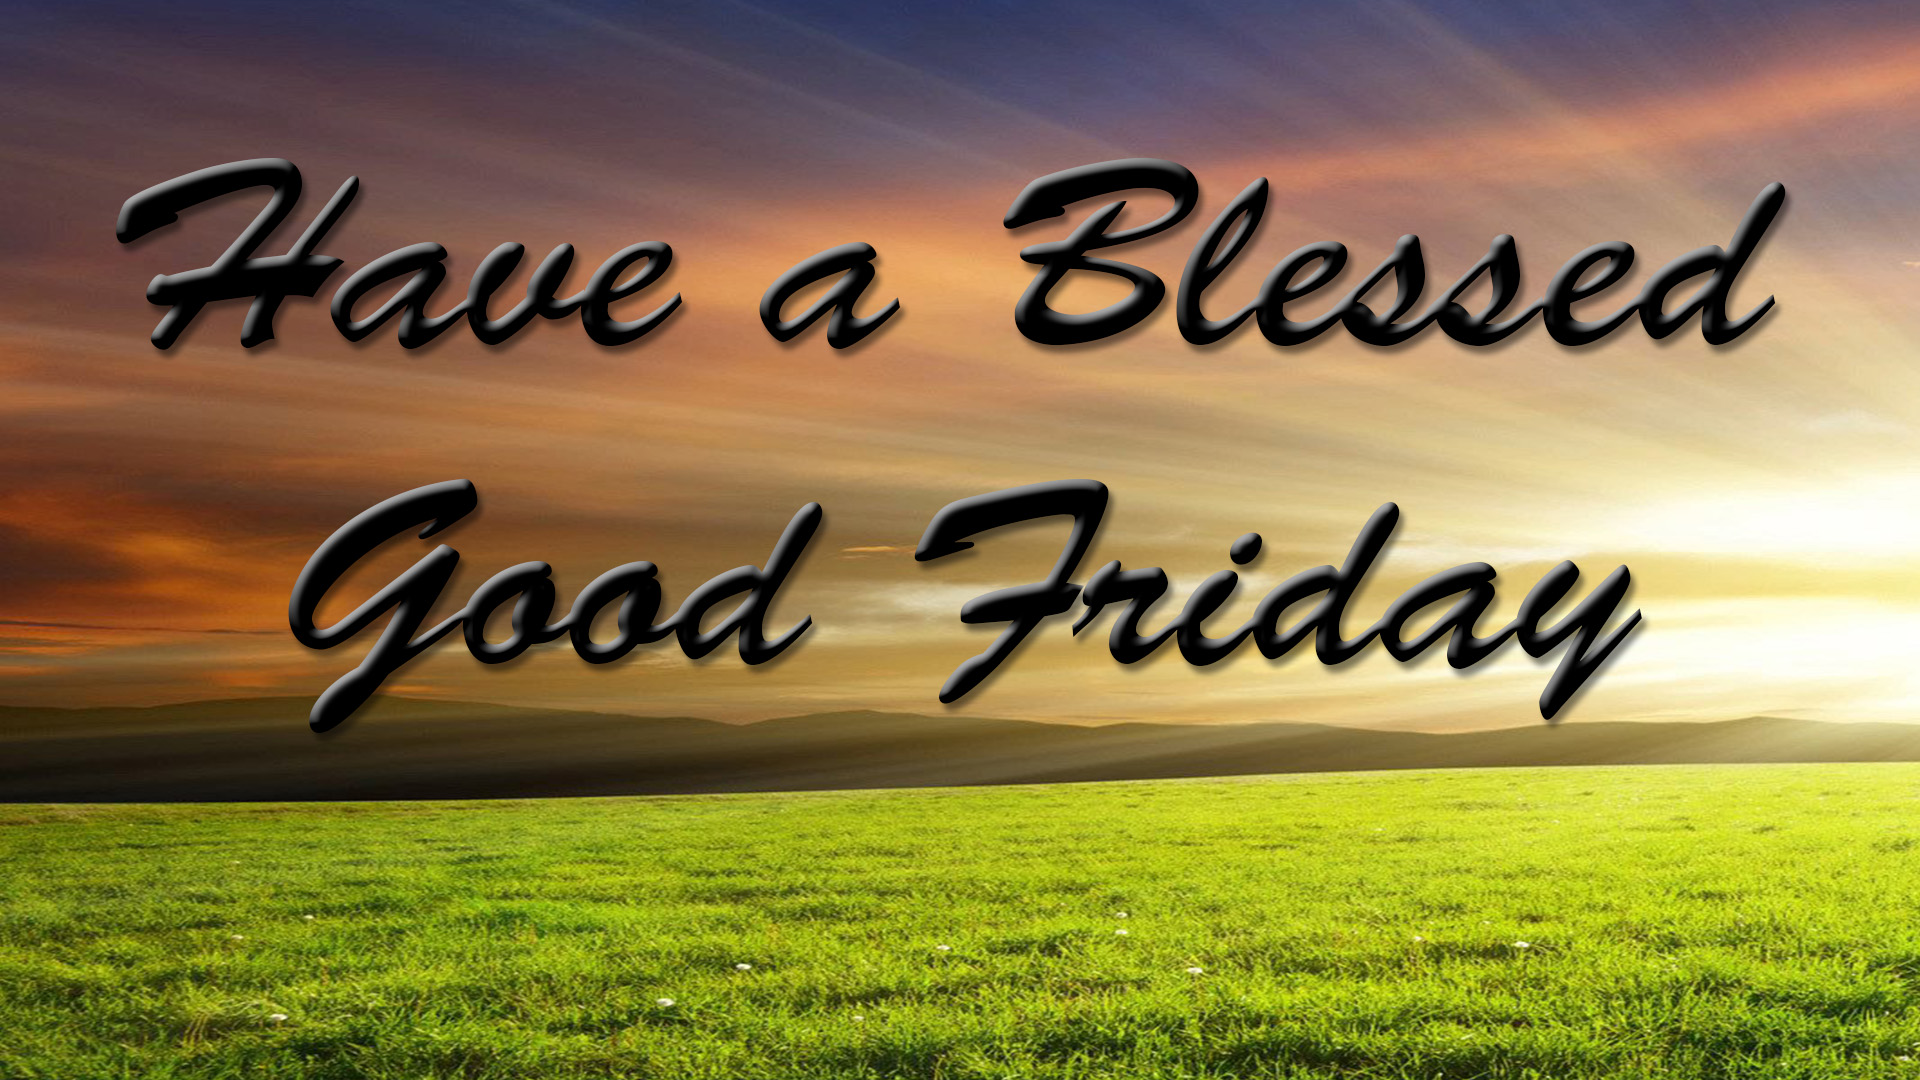 have blessed good friday image hd